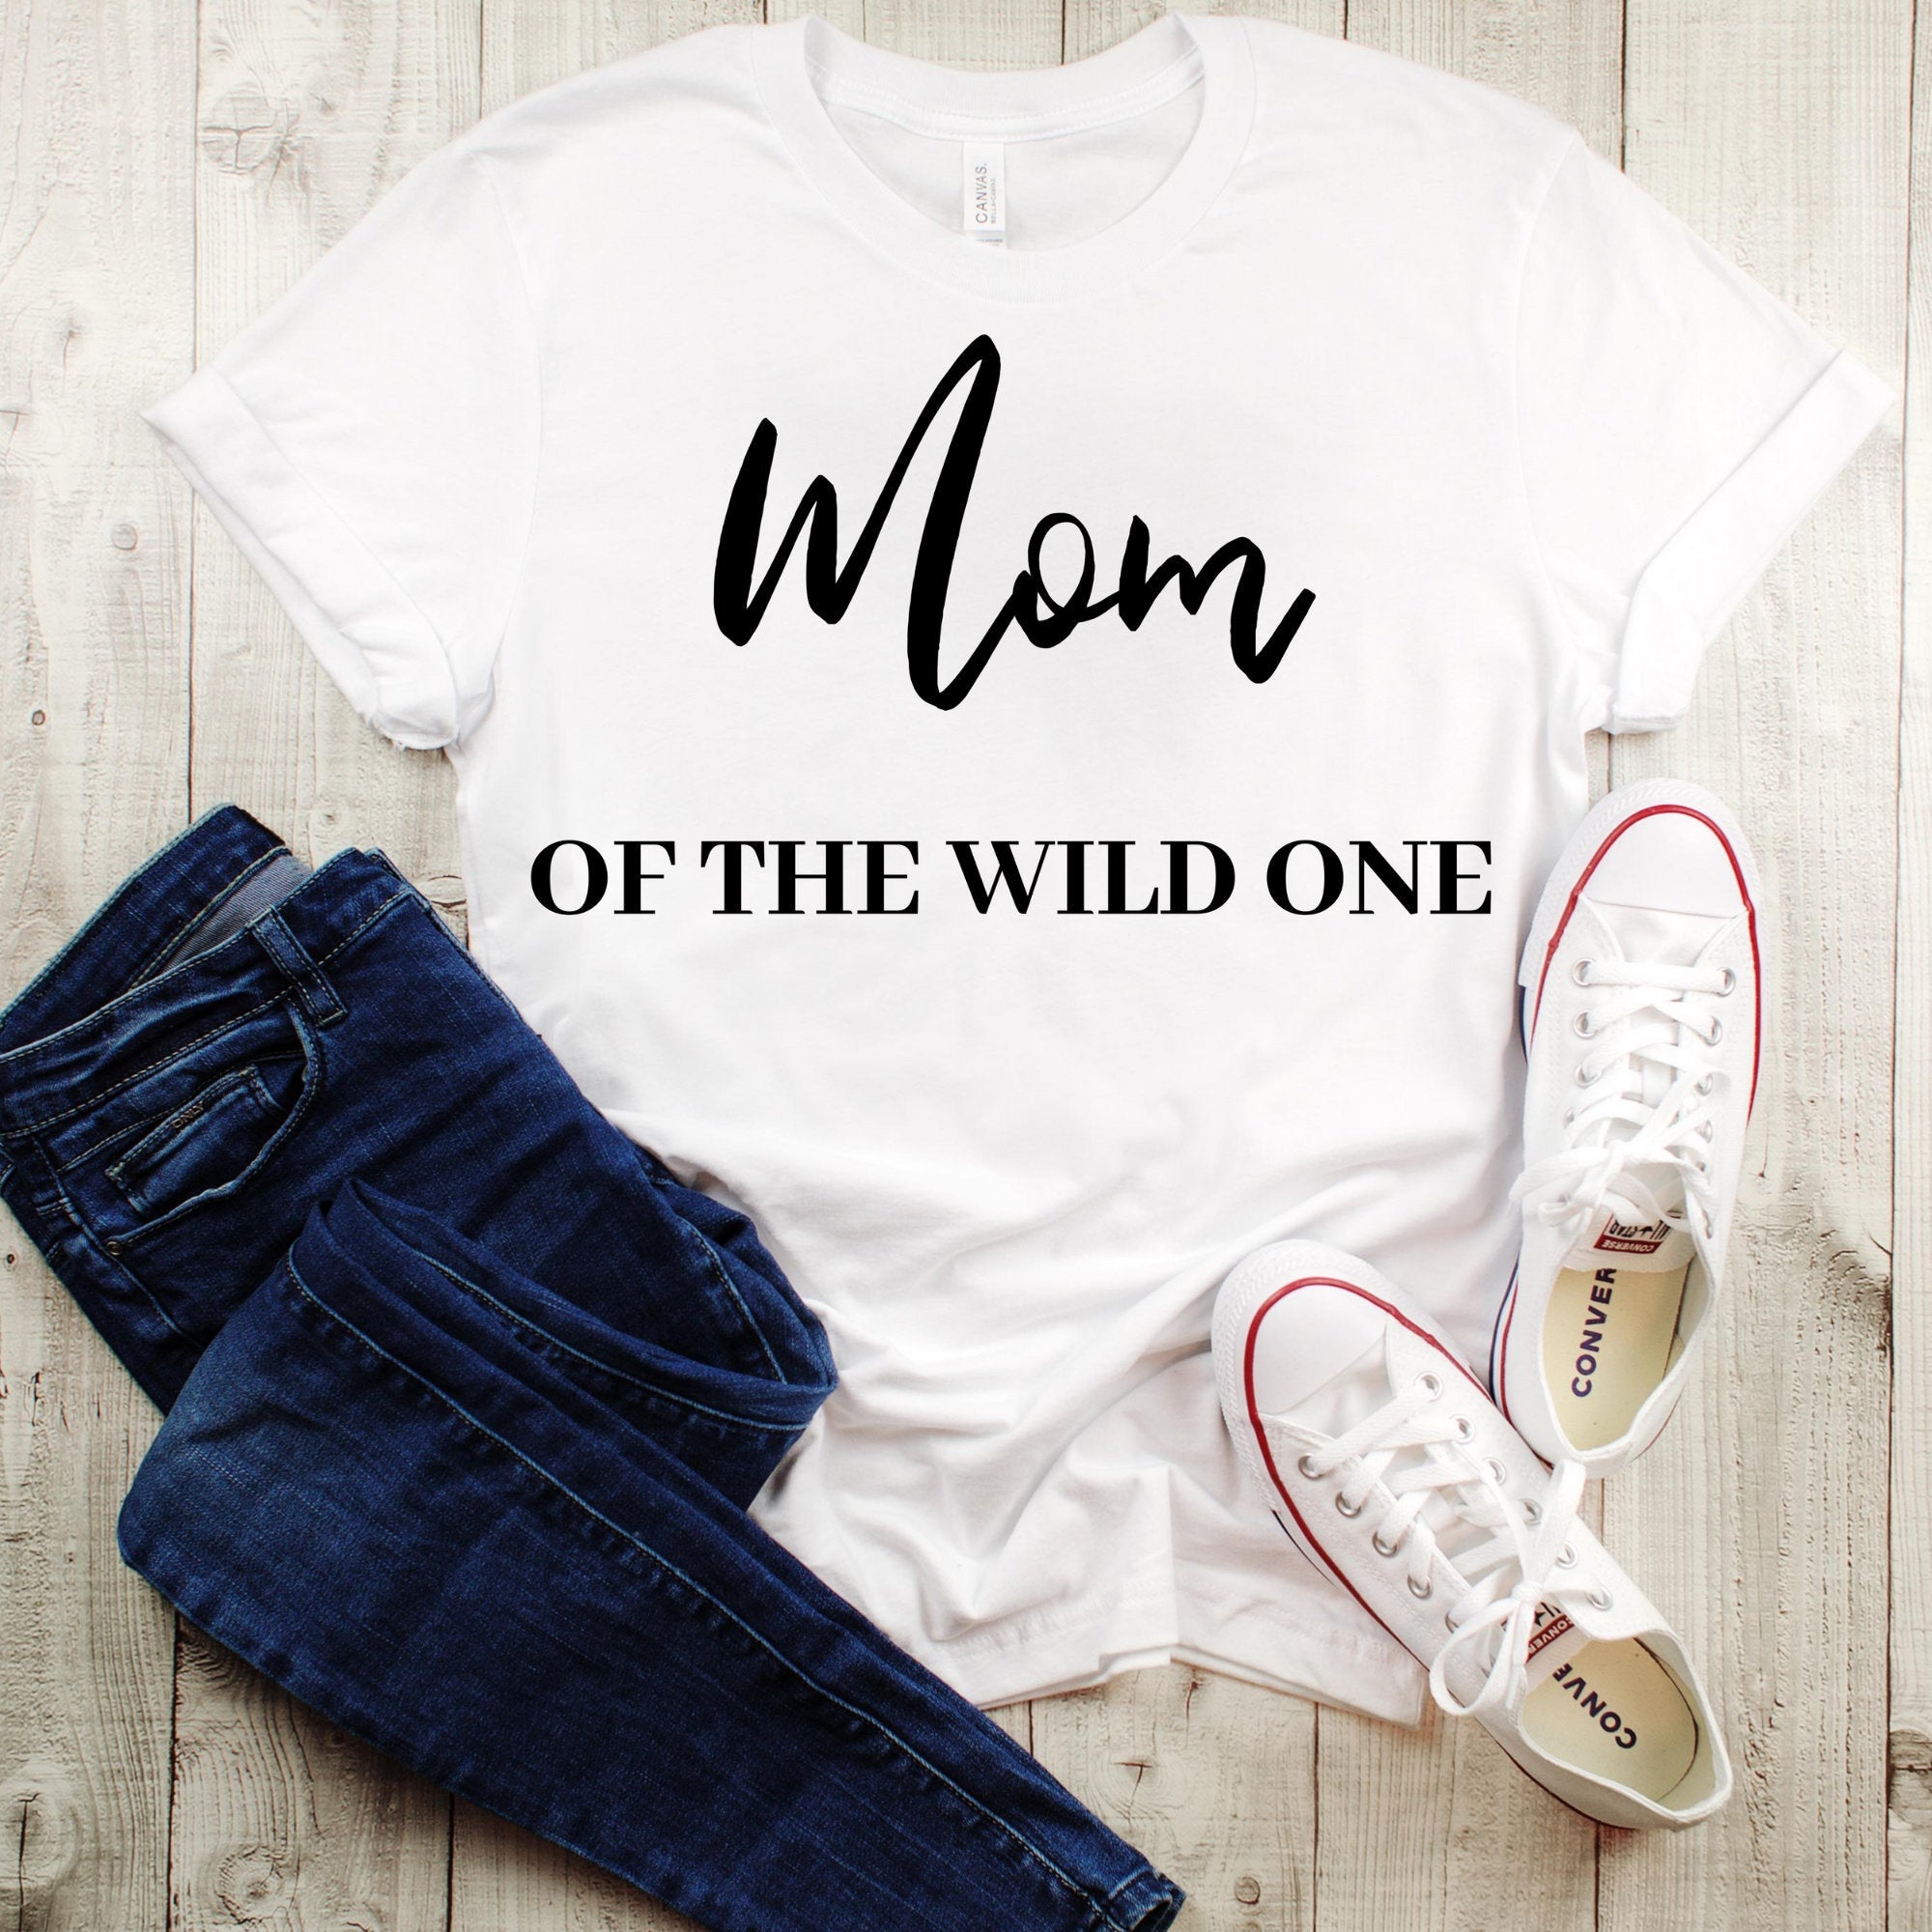 Mother Son Matching Shirts,Mother Daughter Matching Shirts,Funny Matching Shirts,Mom of the Wild One Ladies Tee & The Wild One Toddler Tee - MamaBuzz Creations